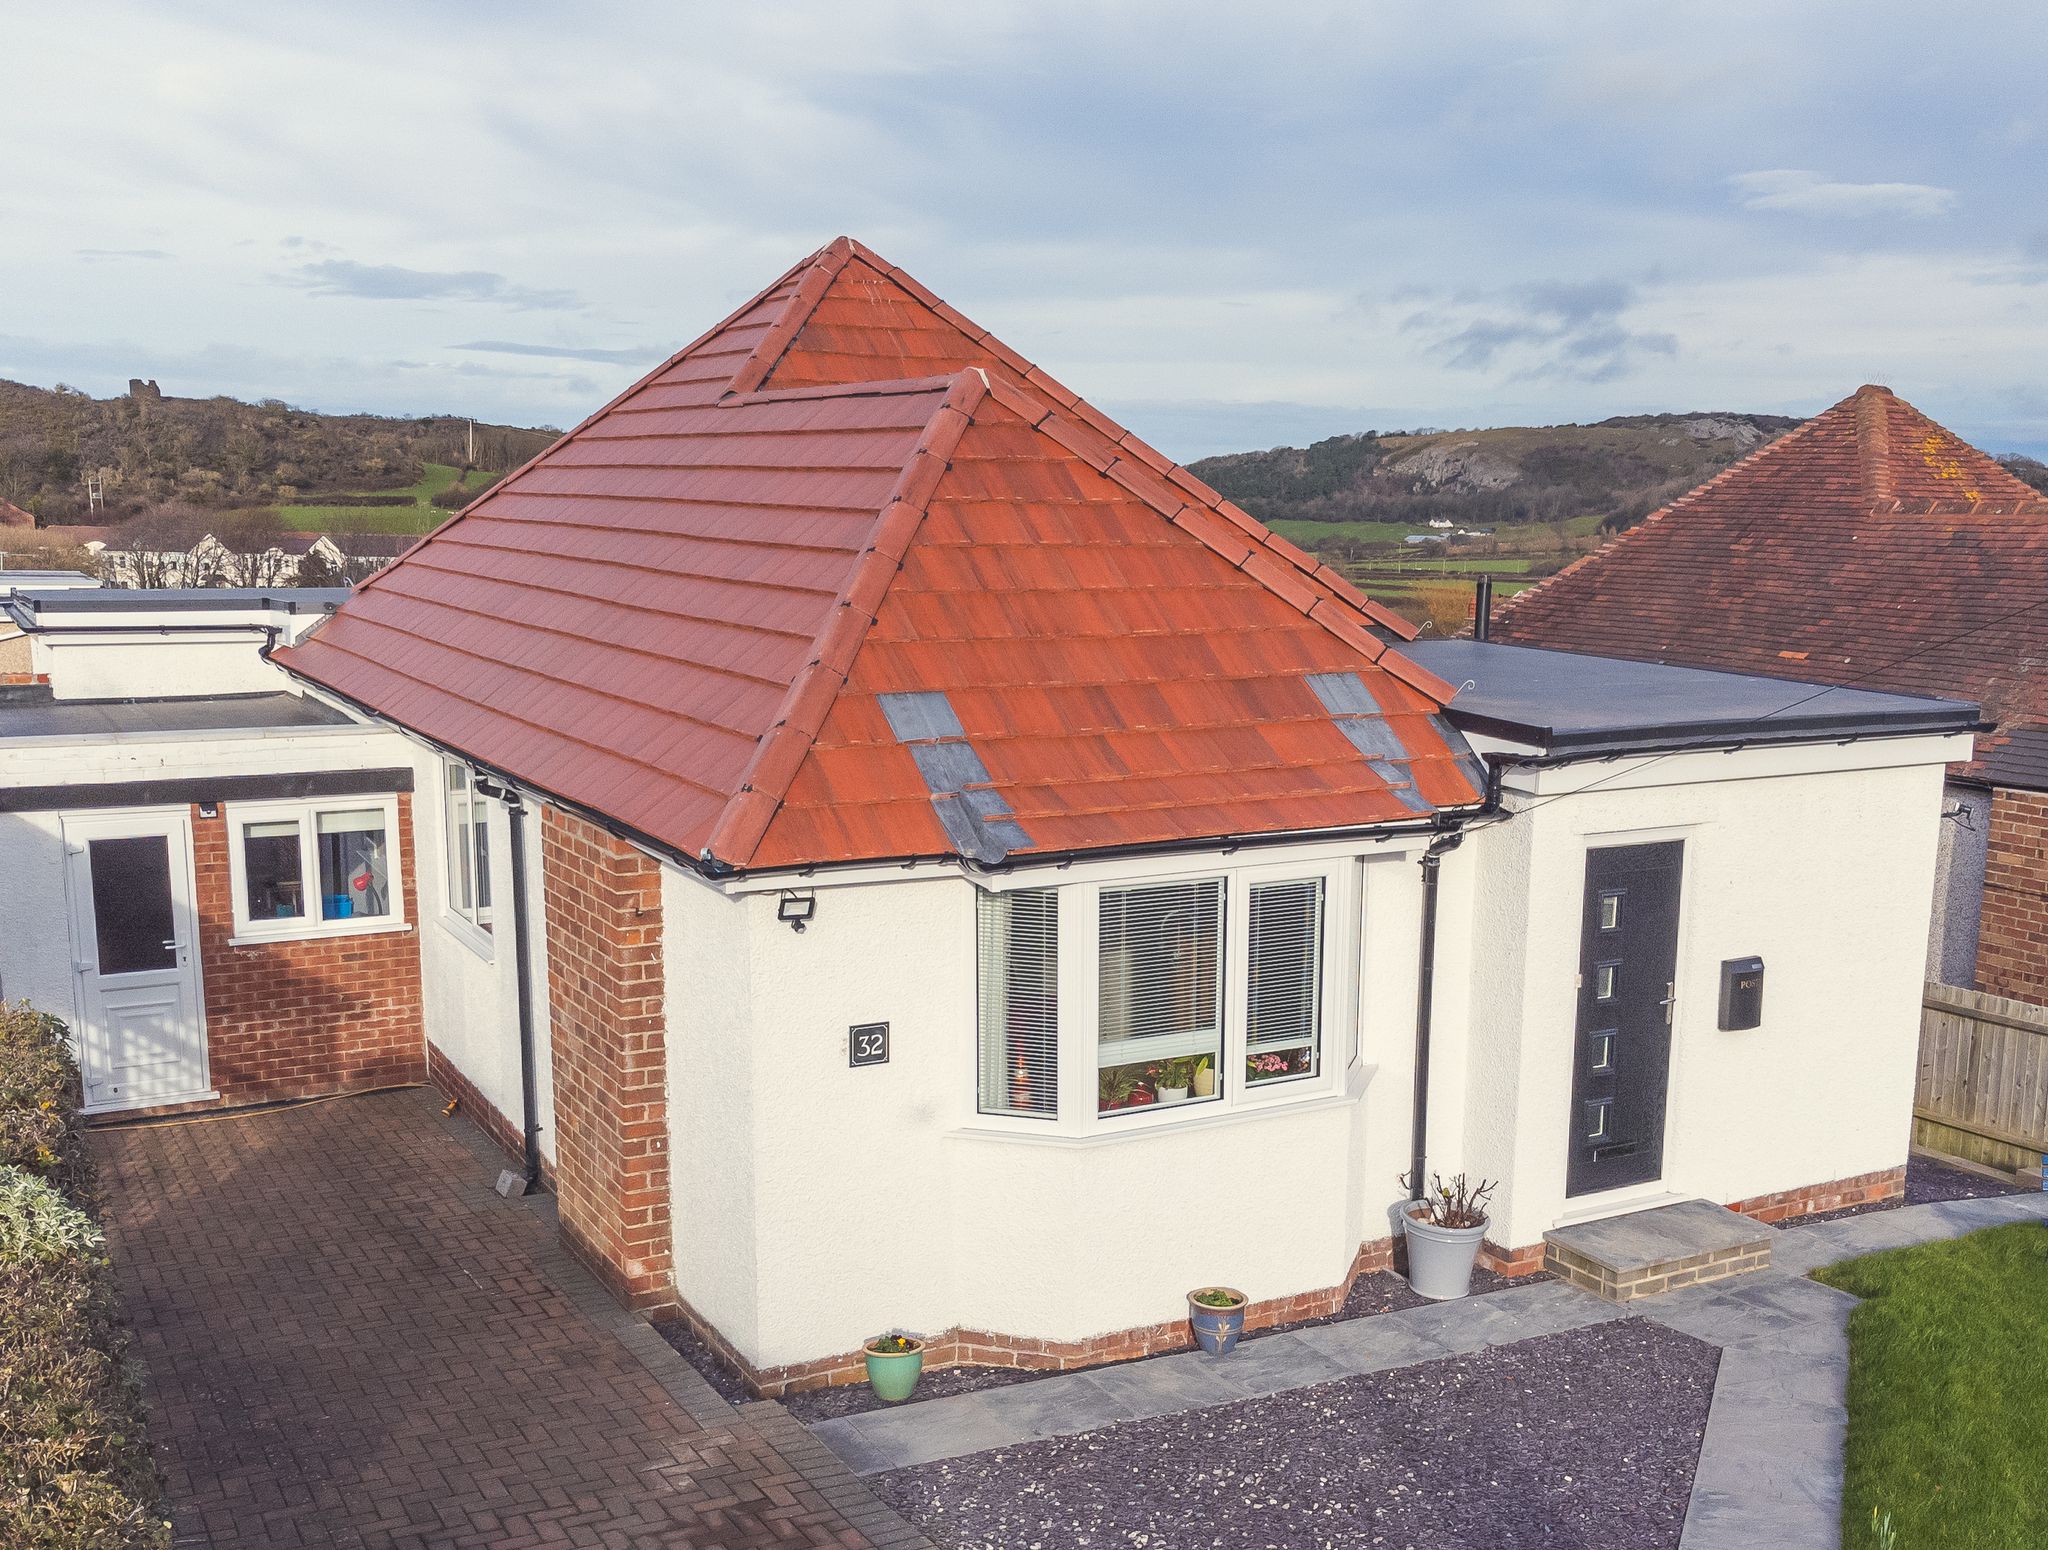 Tile Roof Contractors Eglwys Cross, SY13 - DD Roofing